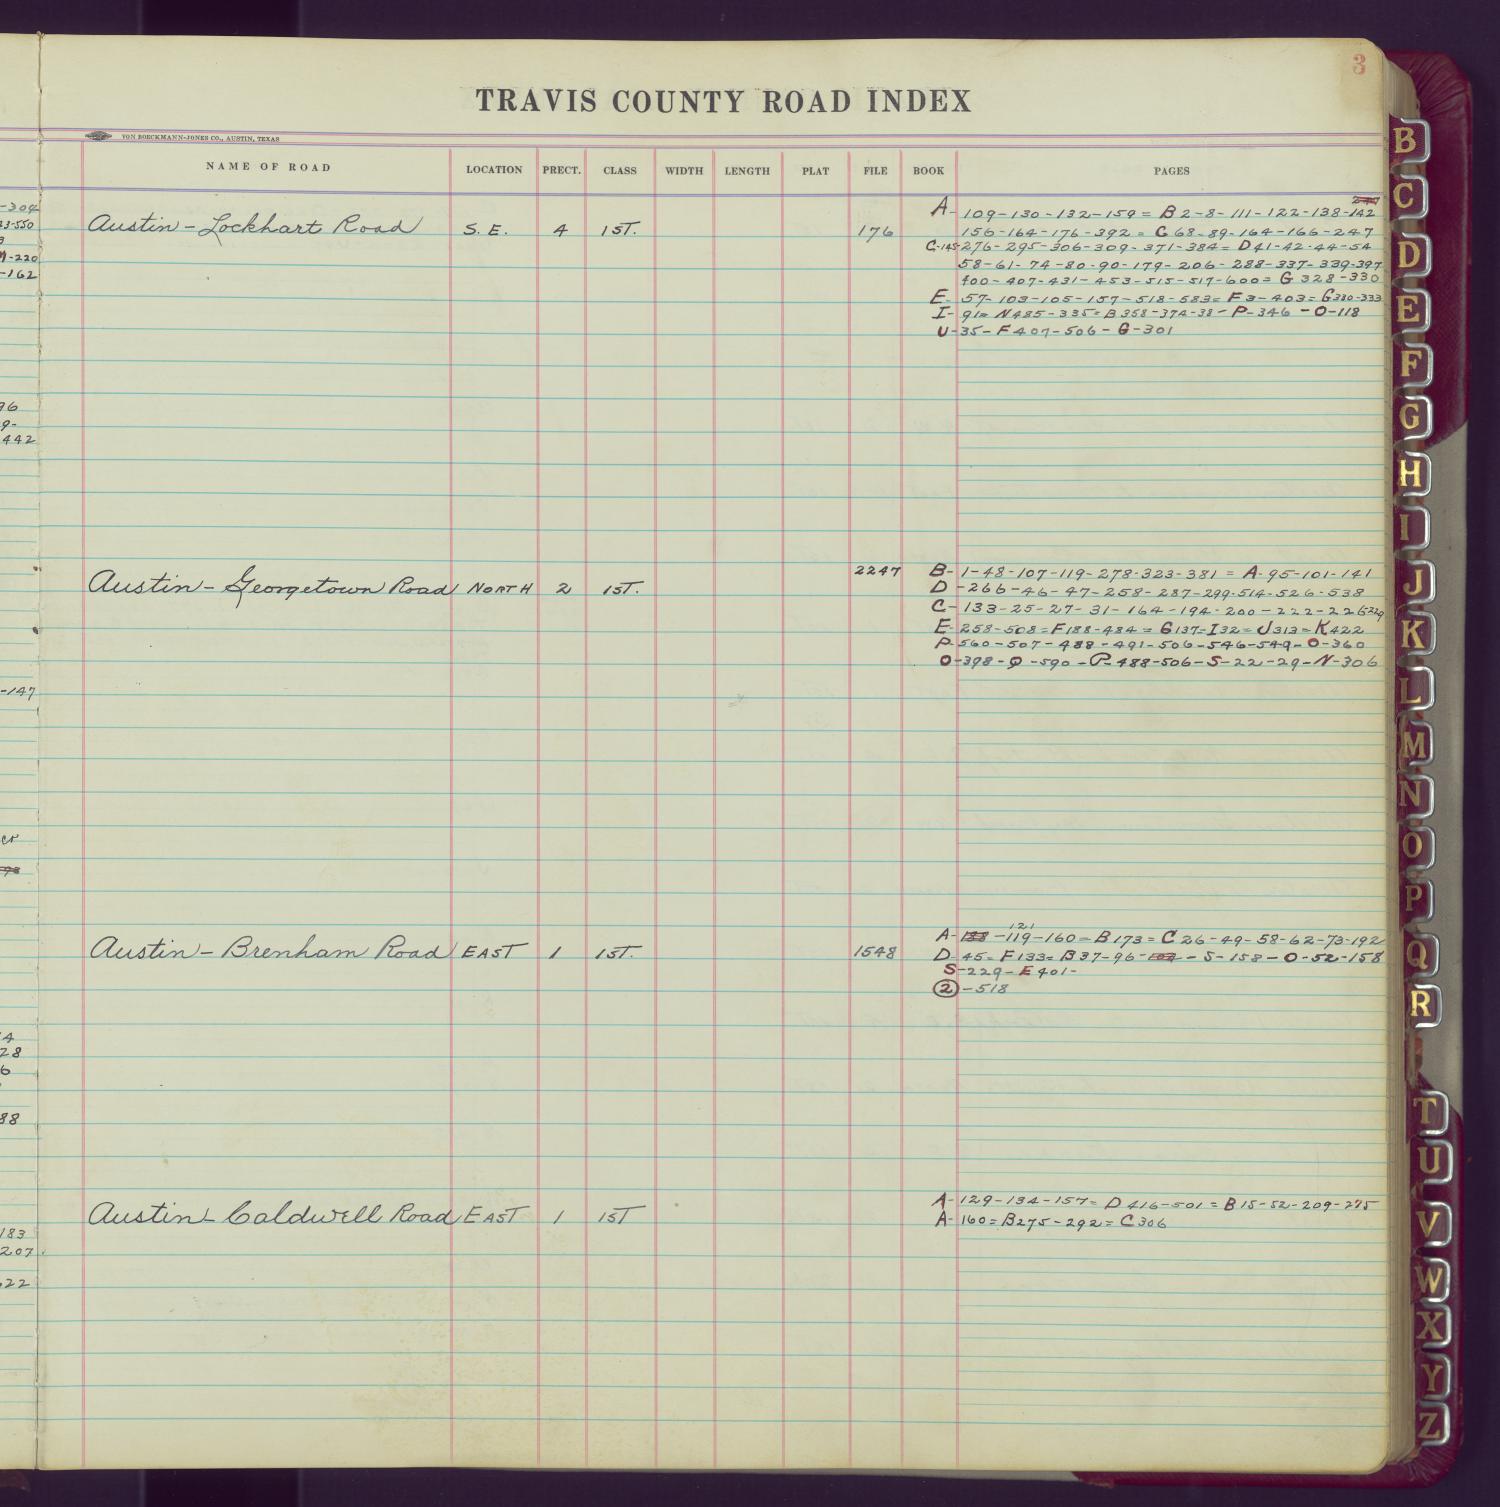 Travis County Clerk Records: Commissioners Court Road Index Page 3